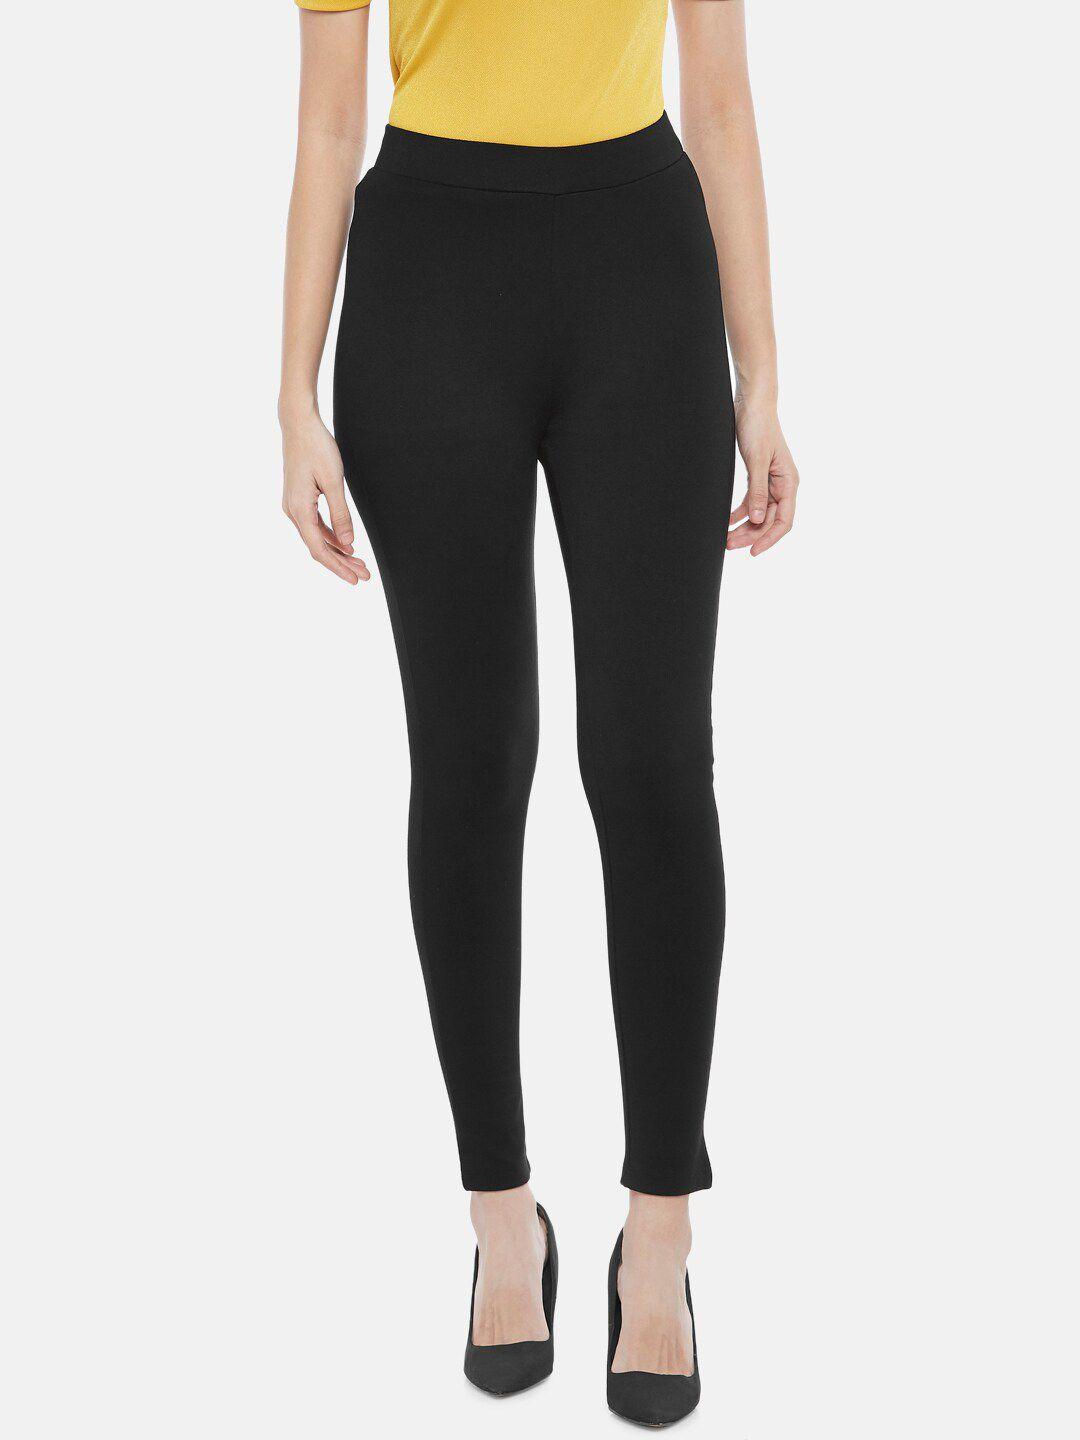 annabelle-by-pantaloons-women-black-solid-skinny-fit-treggings